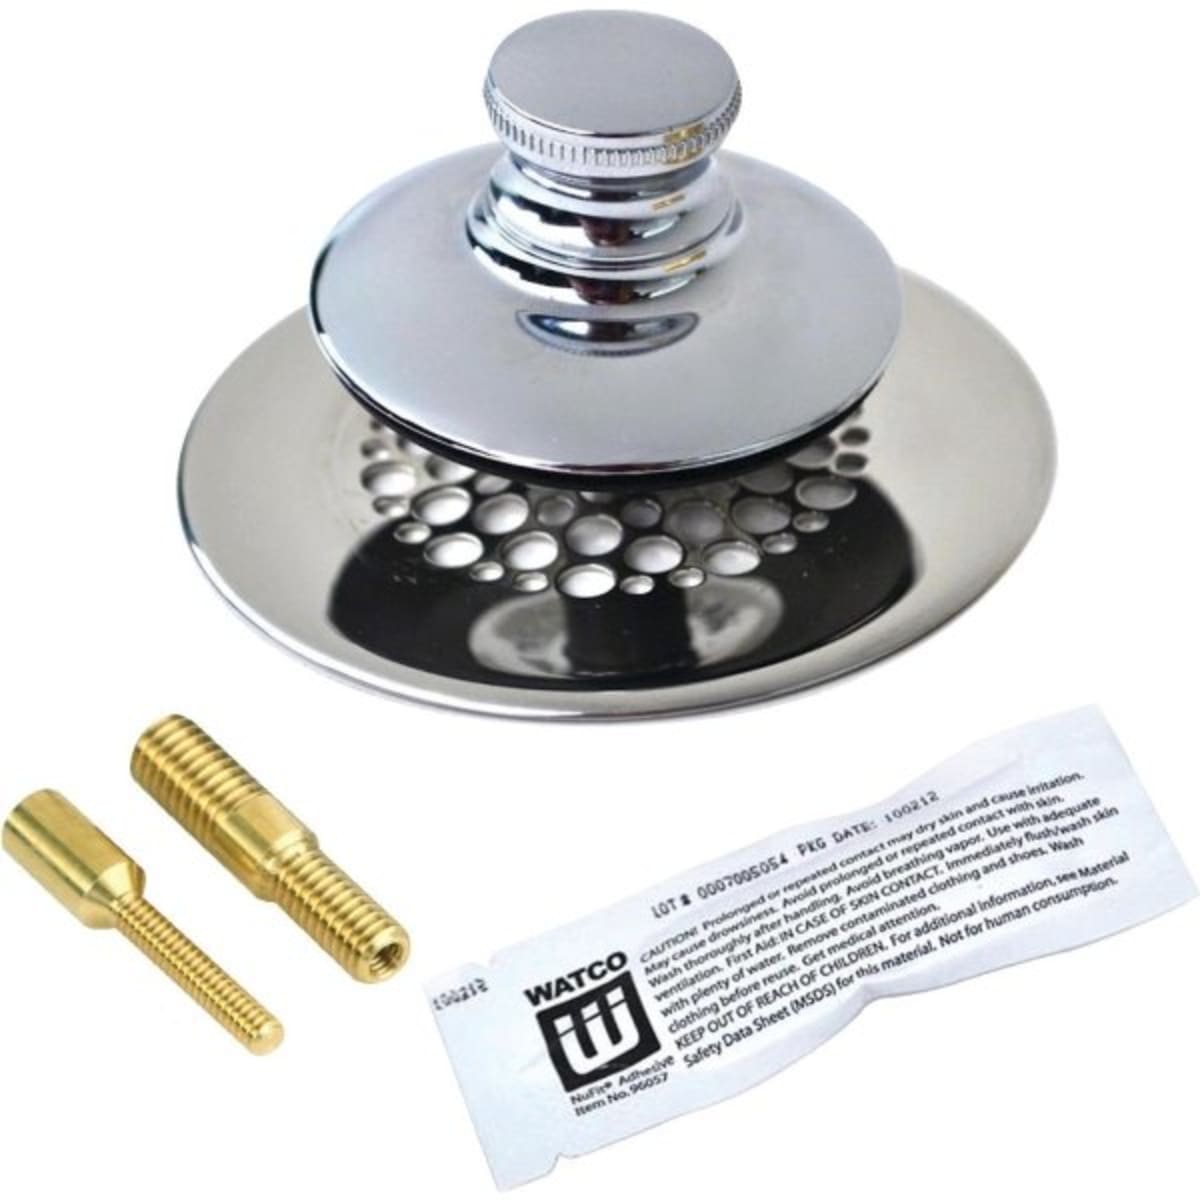 2-7/8" dia. Chrome 6AVK8 New Details about   Watco Brass Tub Closer